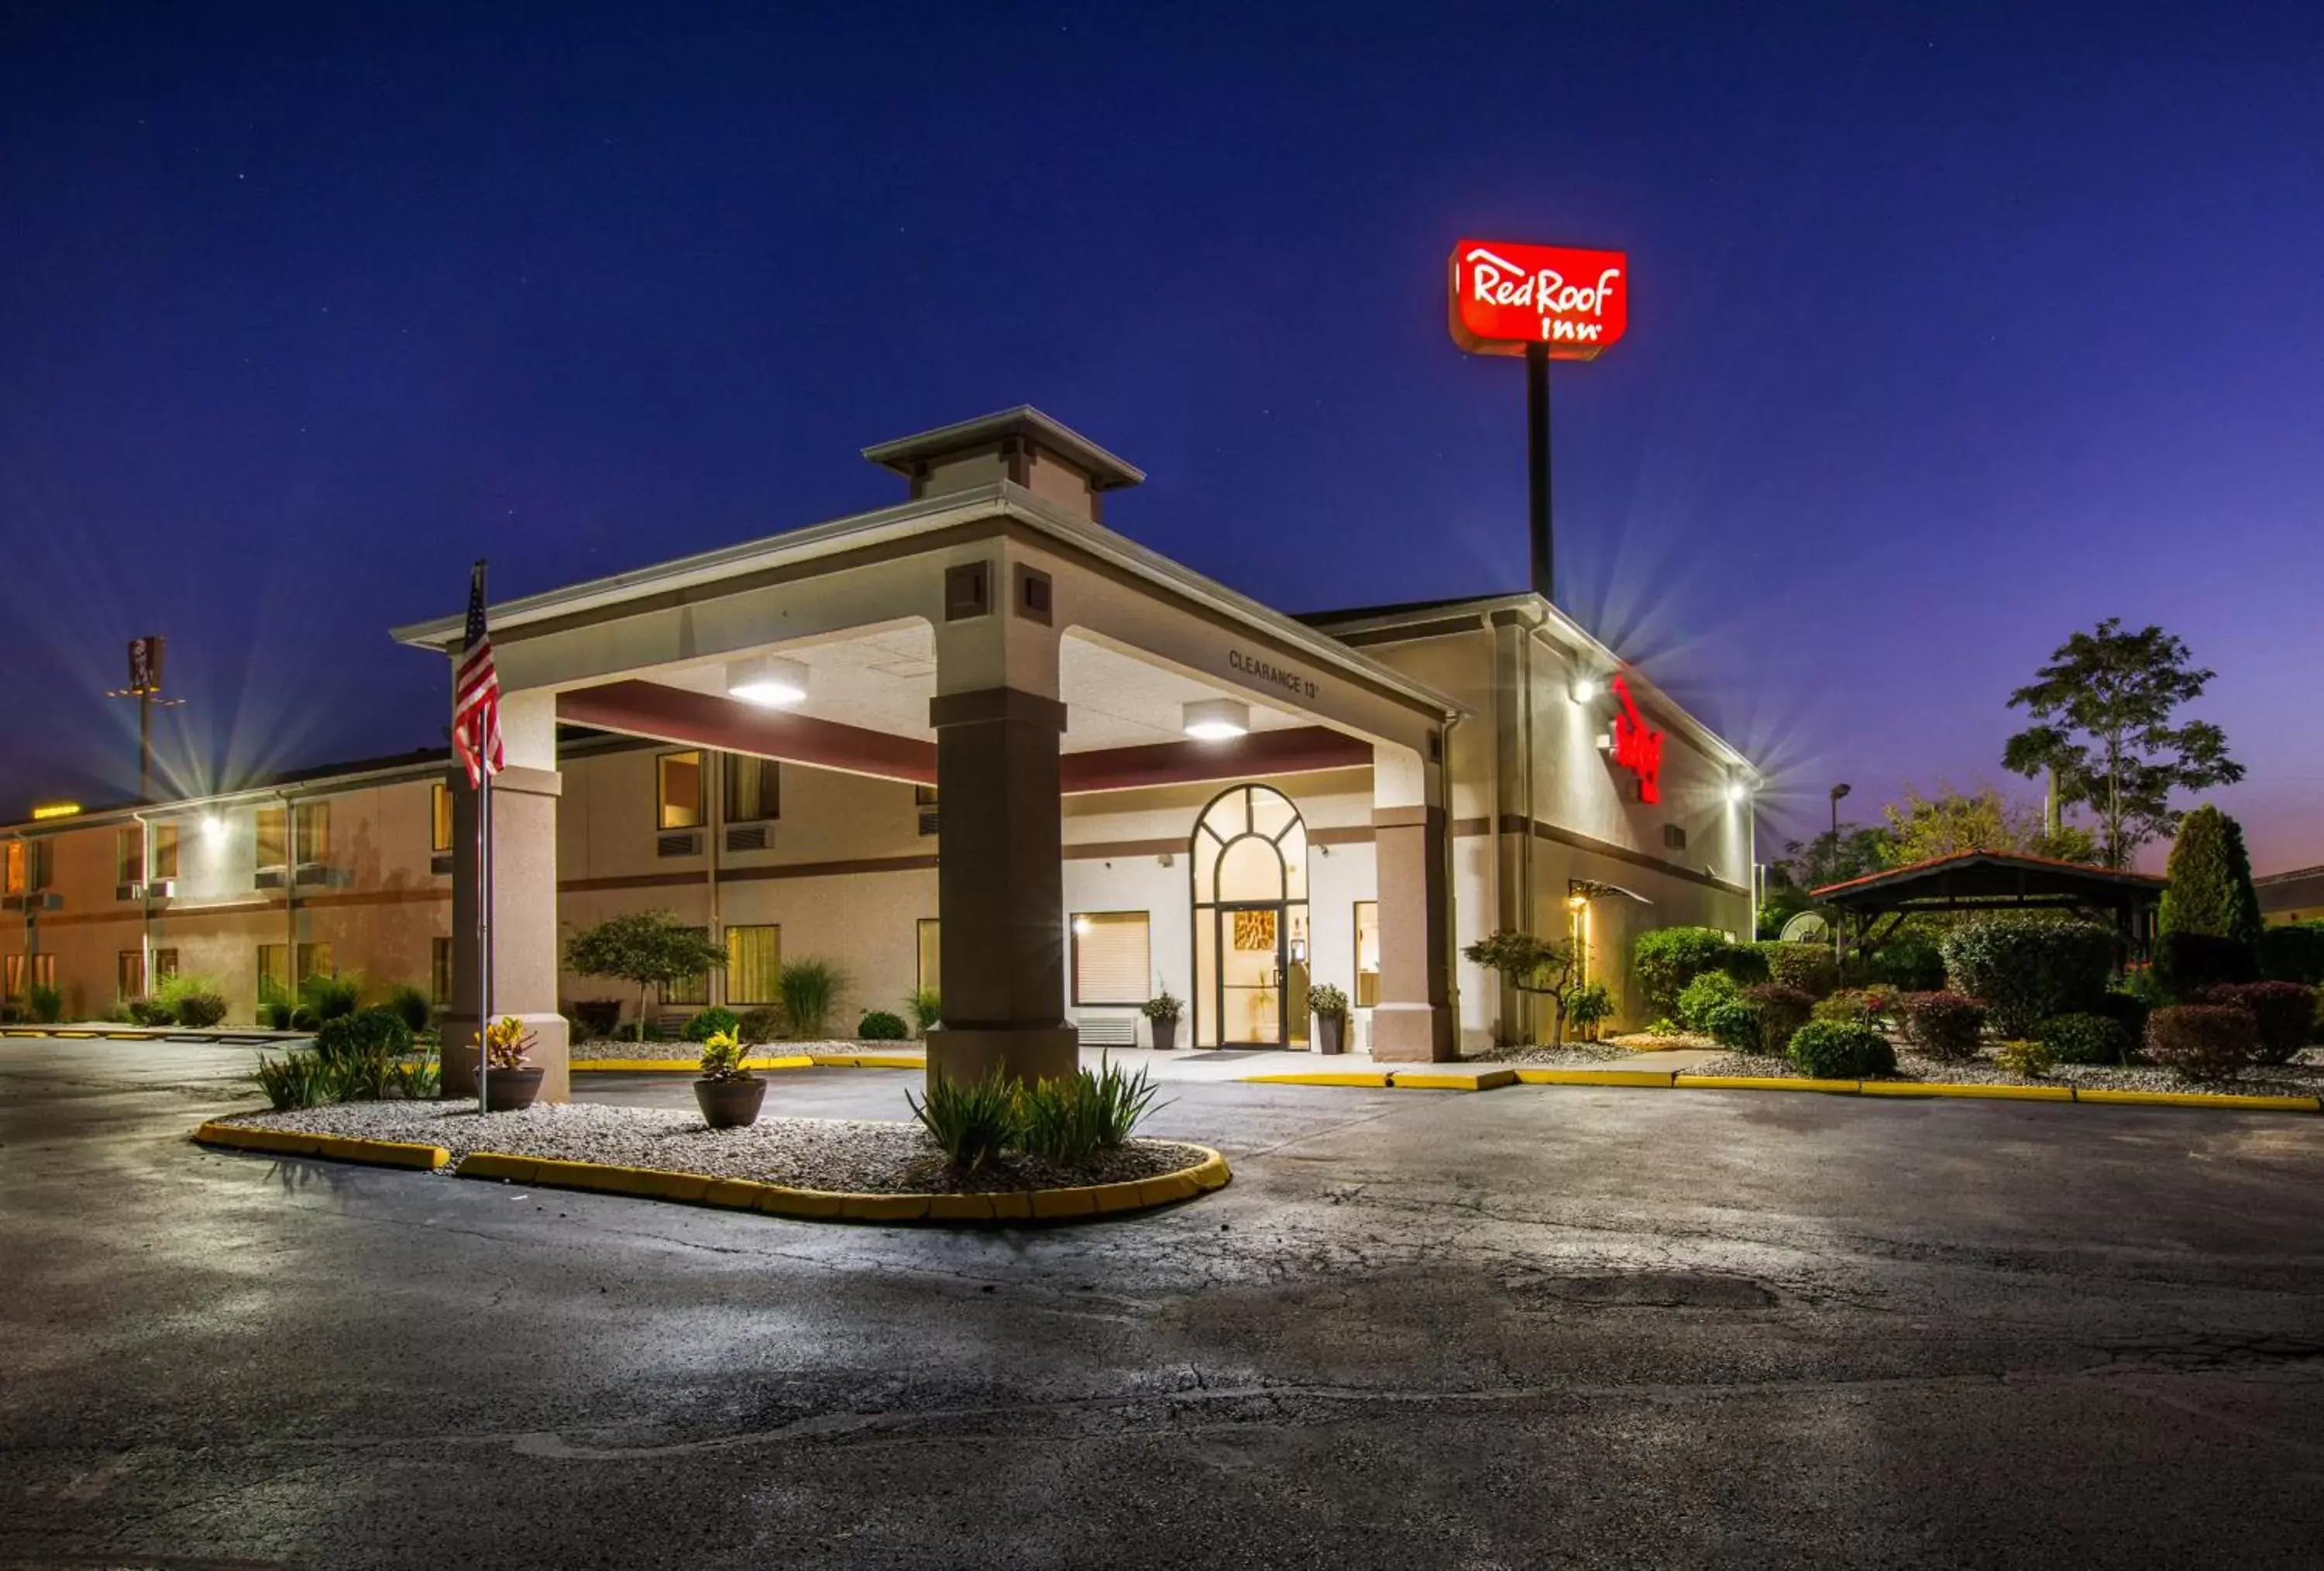 Property Building in Red Roof Inn Carrollton